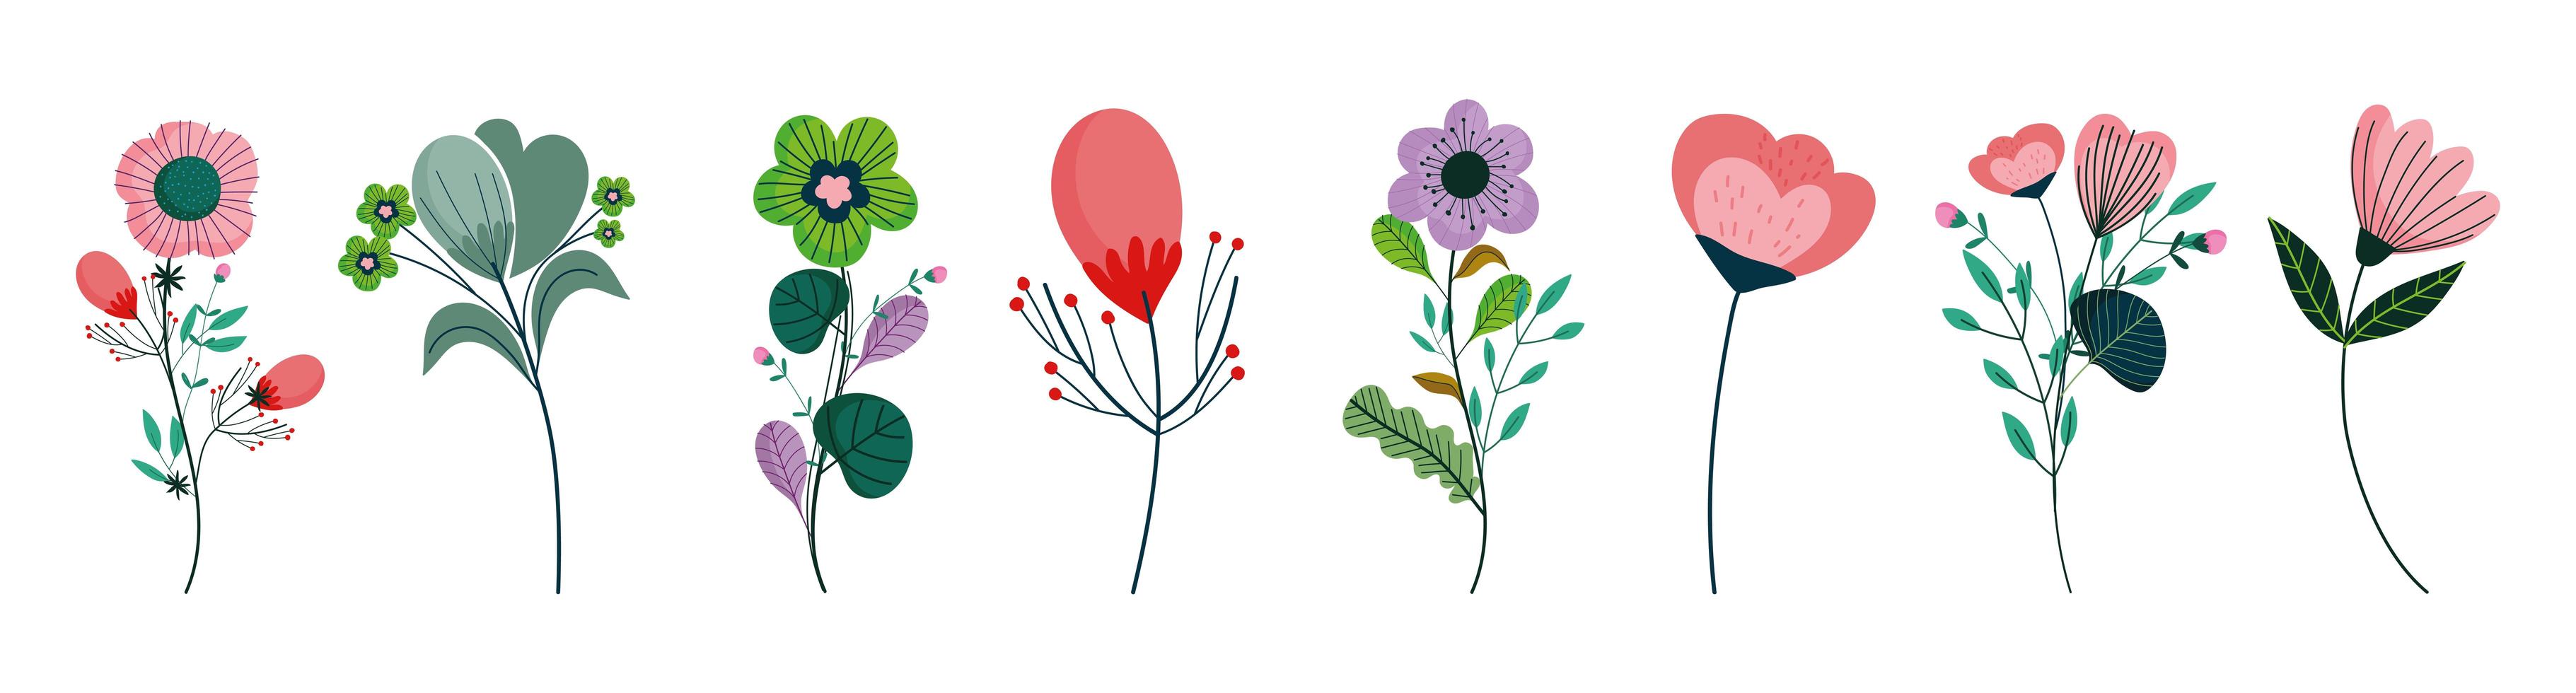 Set with various flat design flowers vector